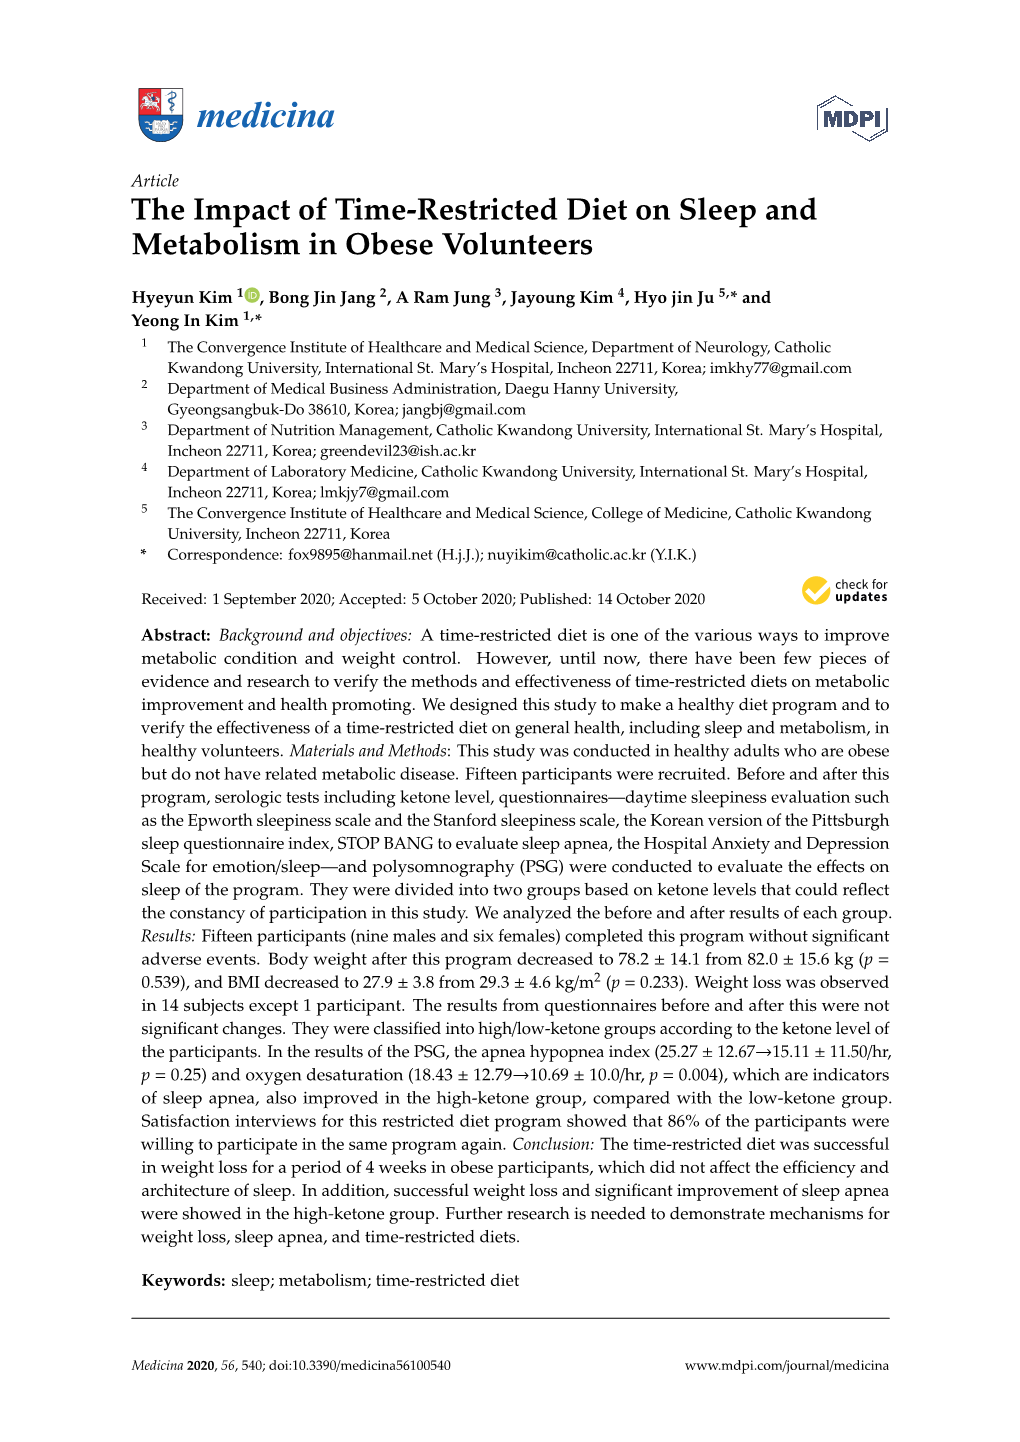 The Impact of Time-Restricted Diet on Sleep and Metabolism in Obese Volunteers